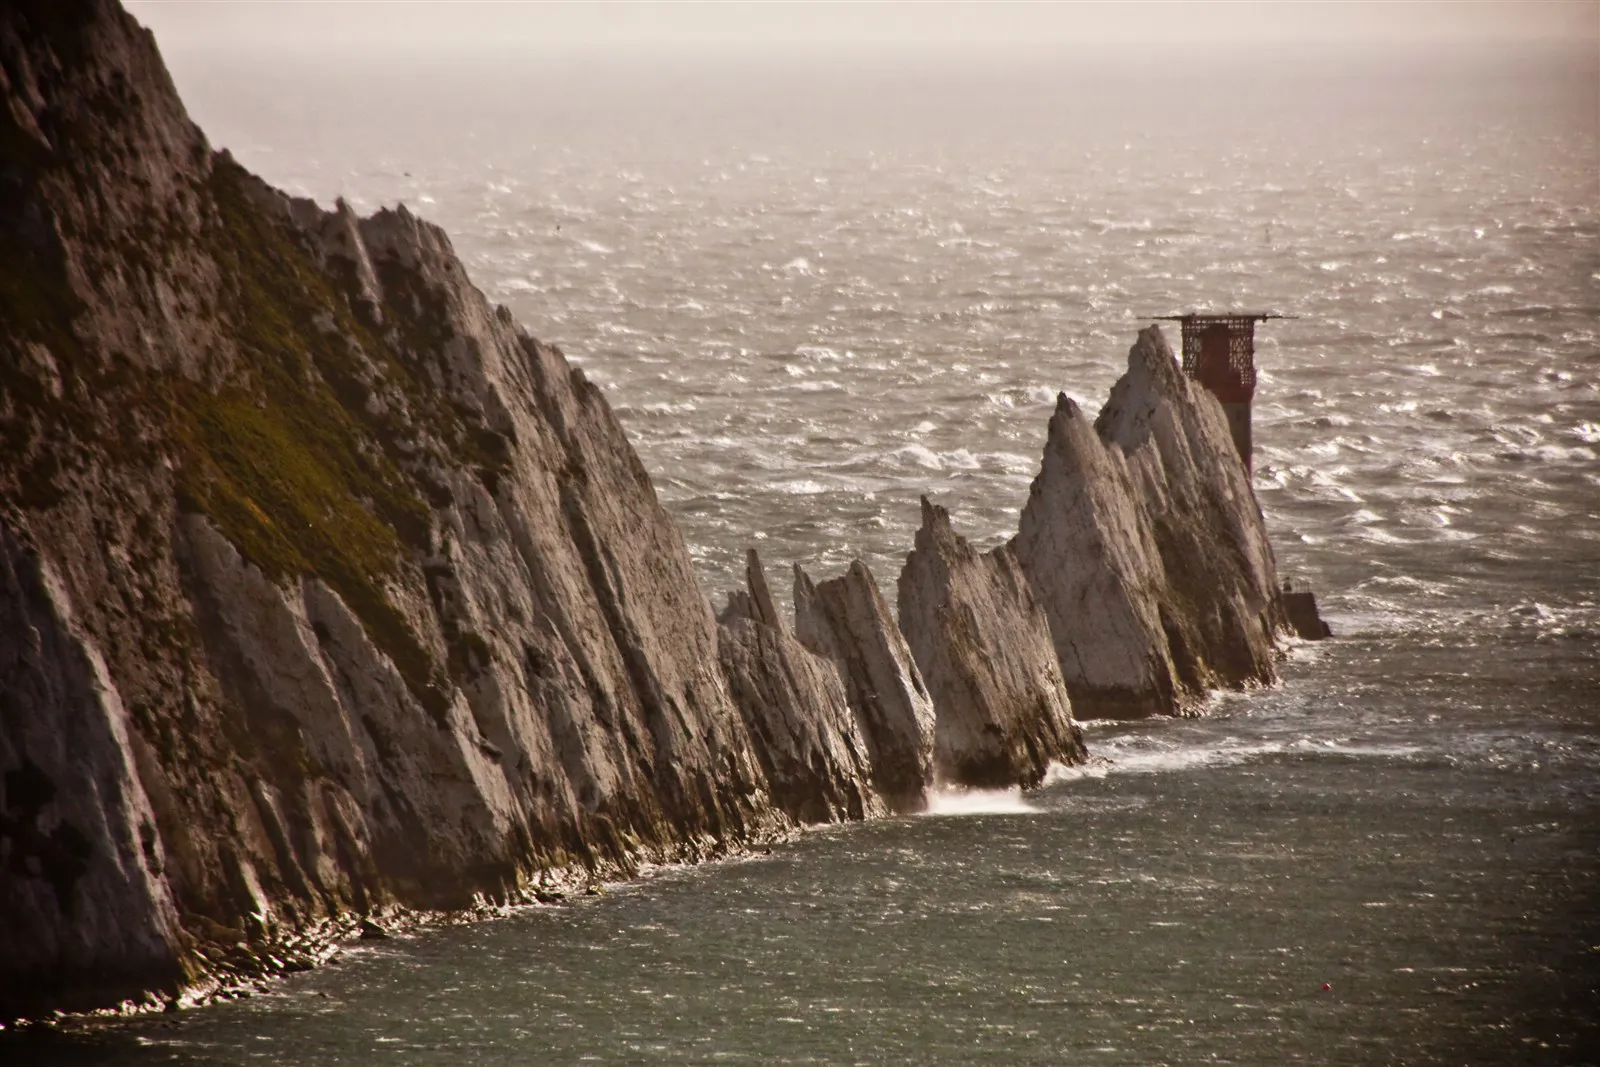 The Needles on the Isle of Wight